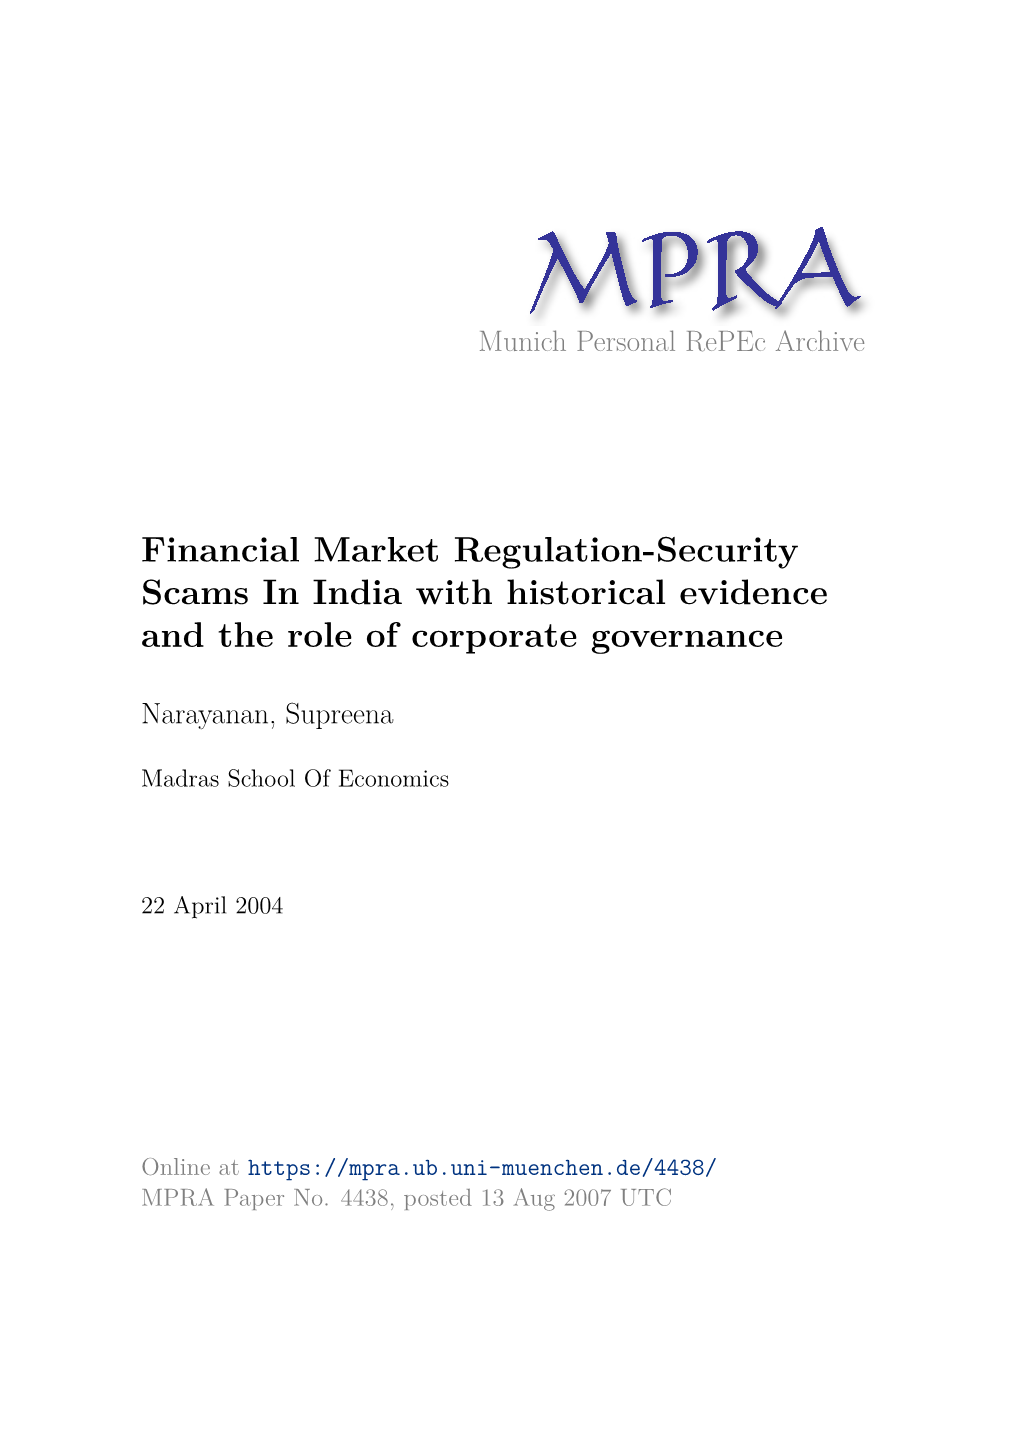 Financial Market Regulation-Security Scams in India with Historical Evidence and the Role of Corporate Governance